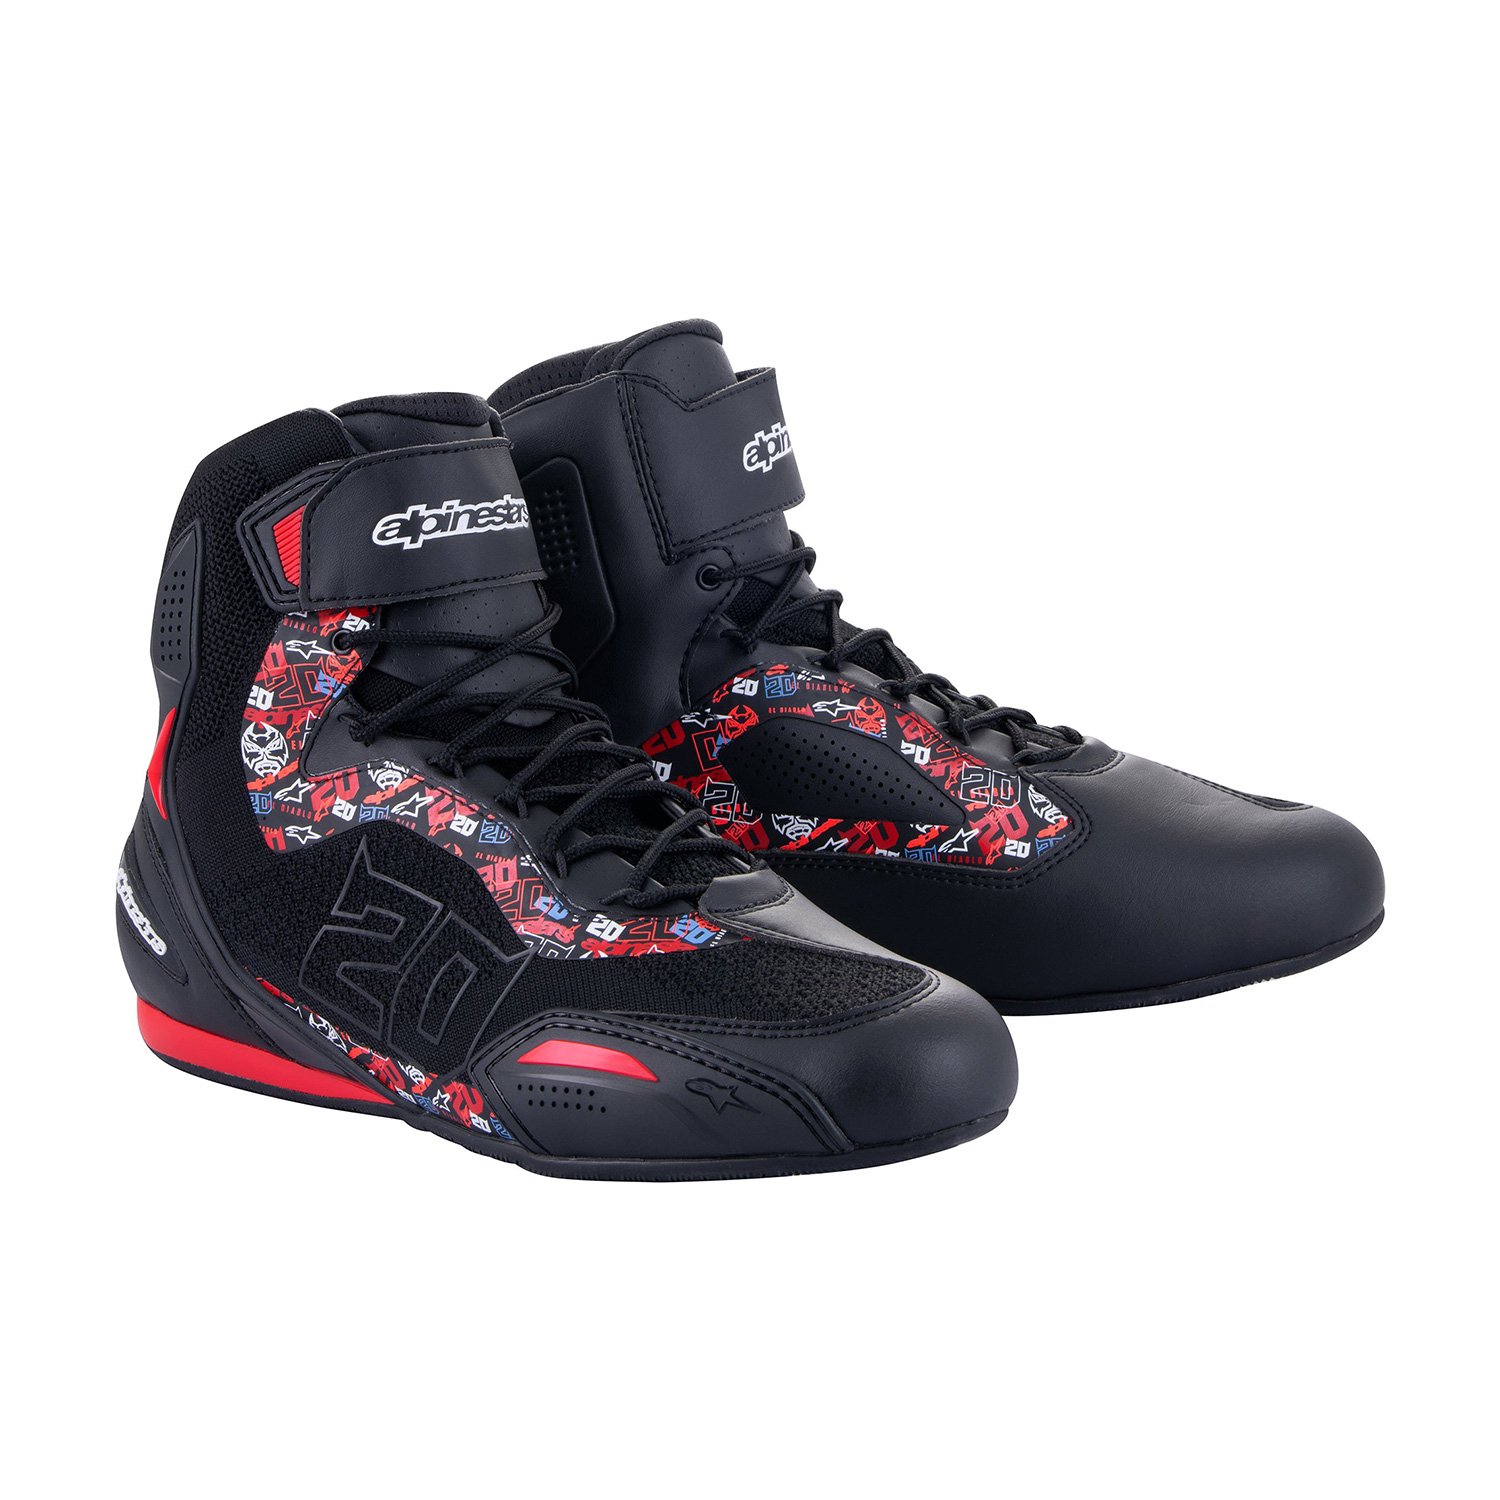 Image of EU Alpinestars FQ20 Faster-3 Rideknit Noir Bright Rouge Chaussures Taille US 9